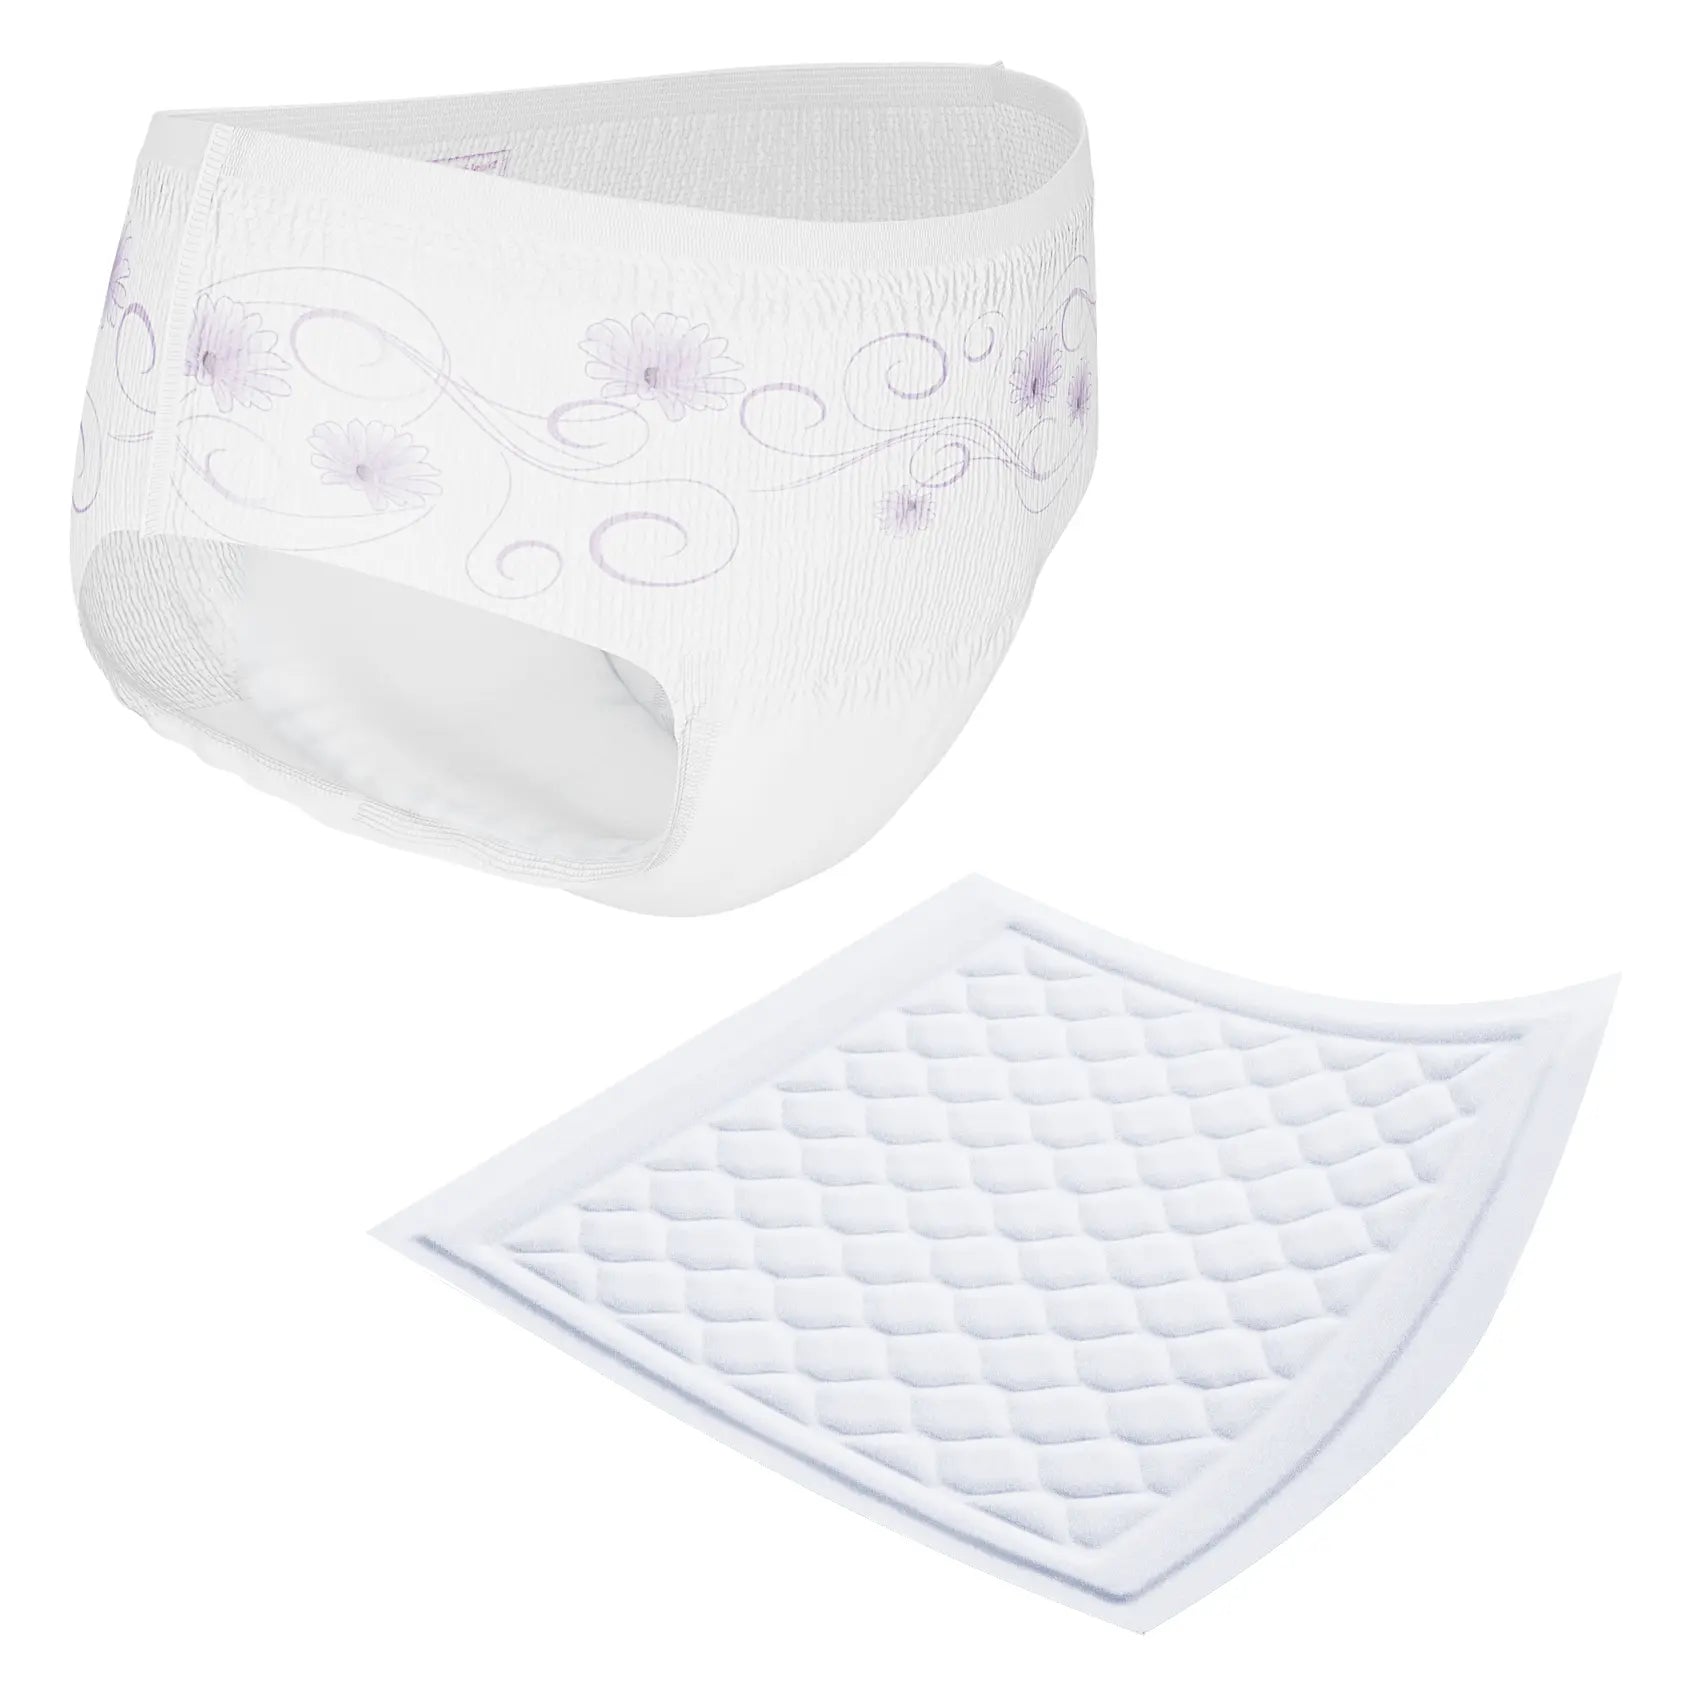 Pads & Protection - Incontinence Mattress Protectors & Pads | Vyne